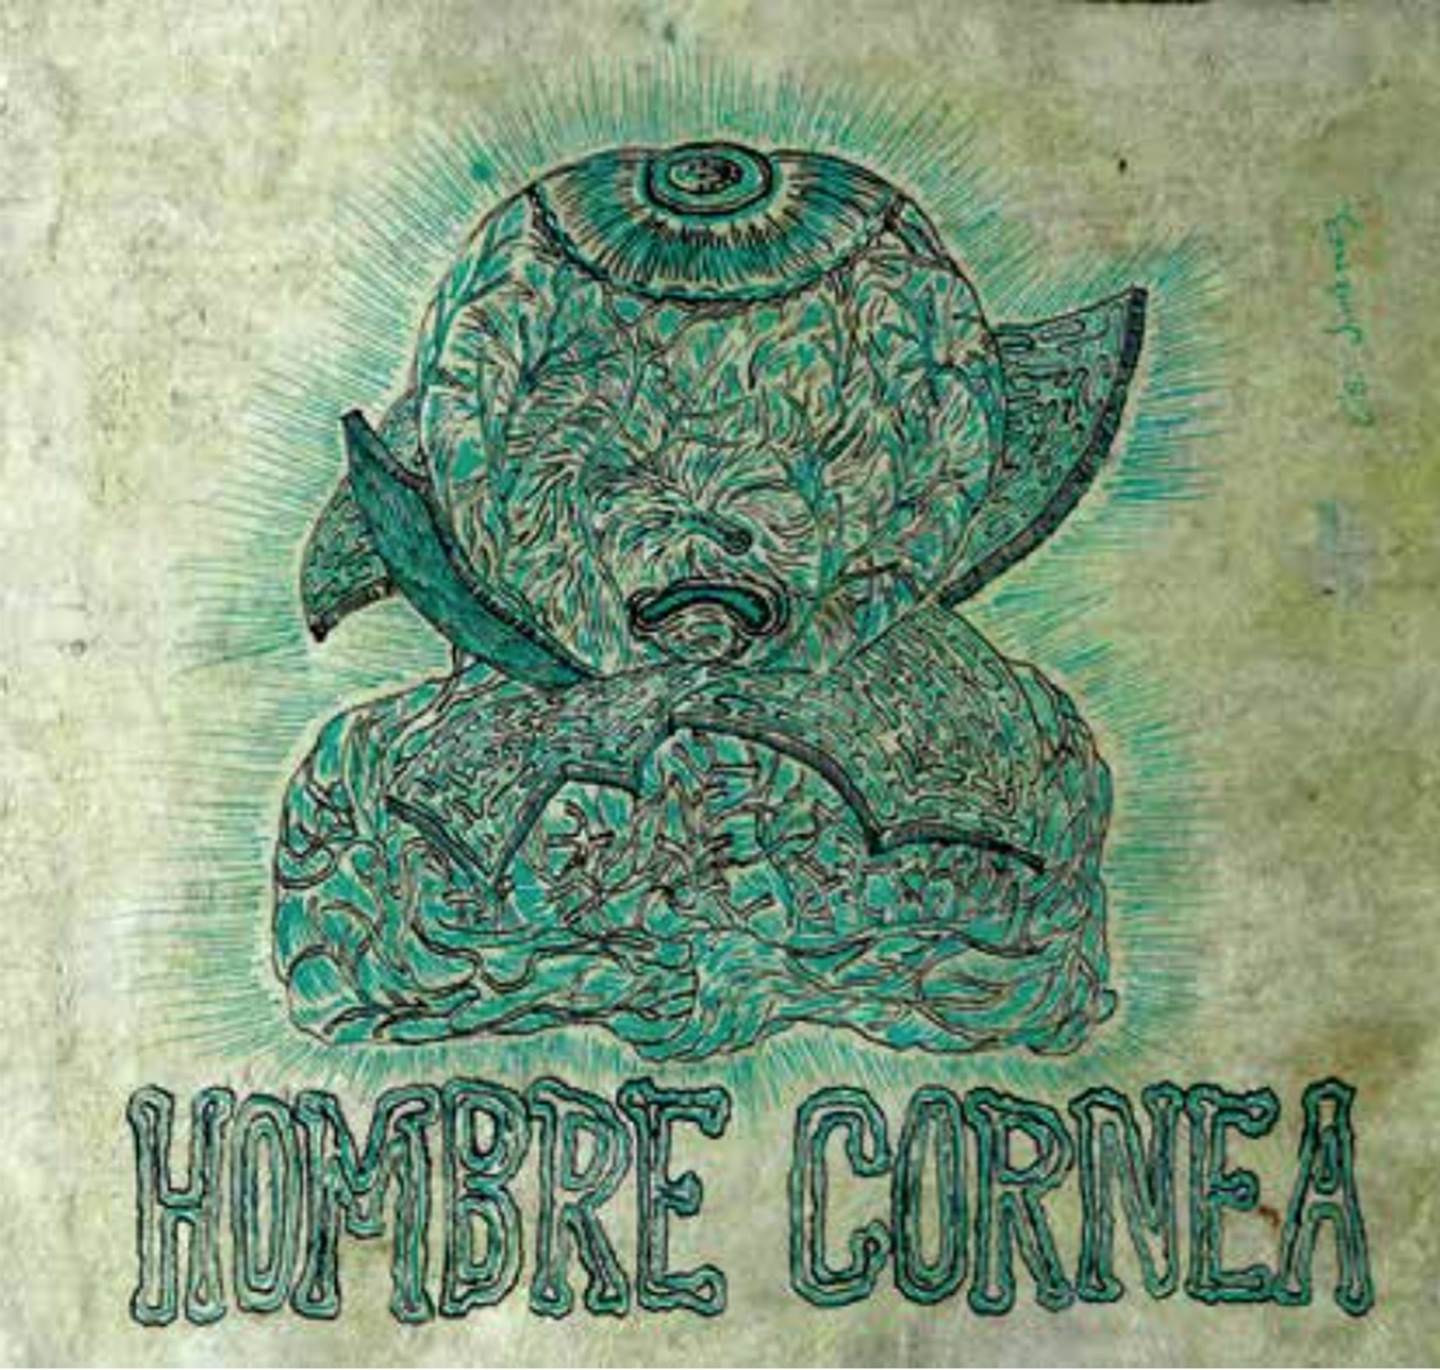 Hombre Córnea, original Abstract Collage Drawing and Illustration by Cisco Jiménez